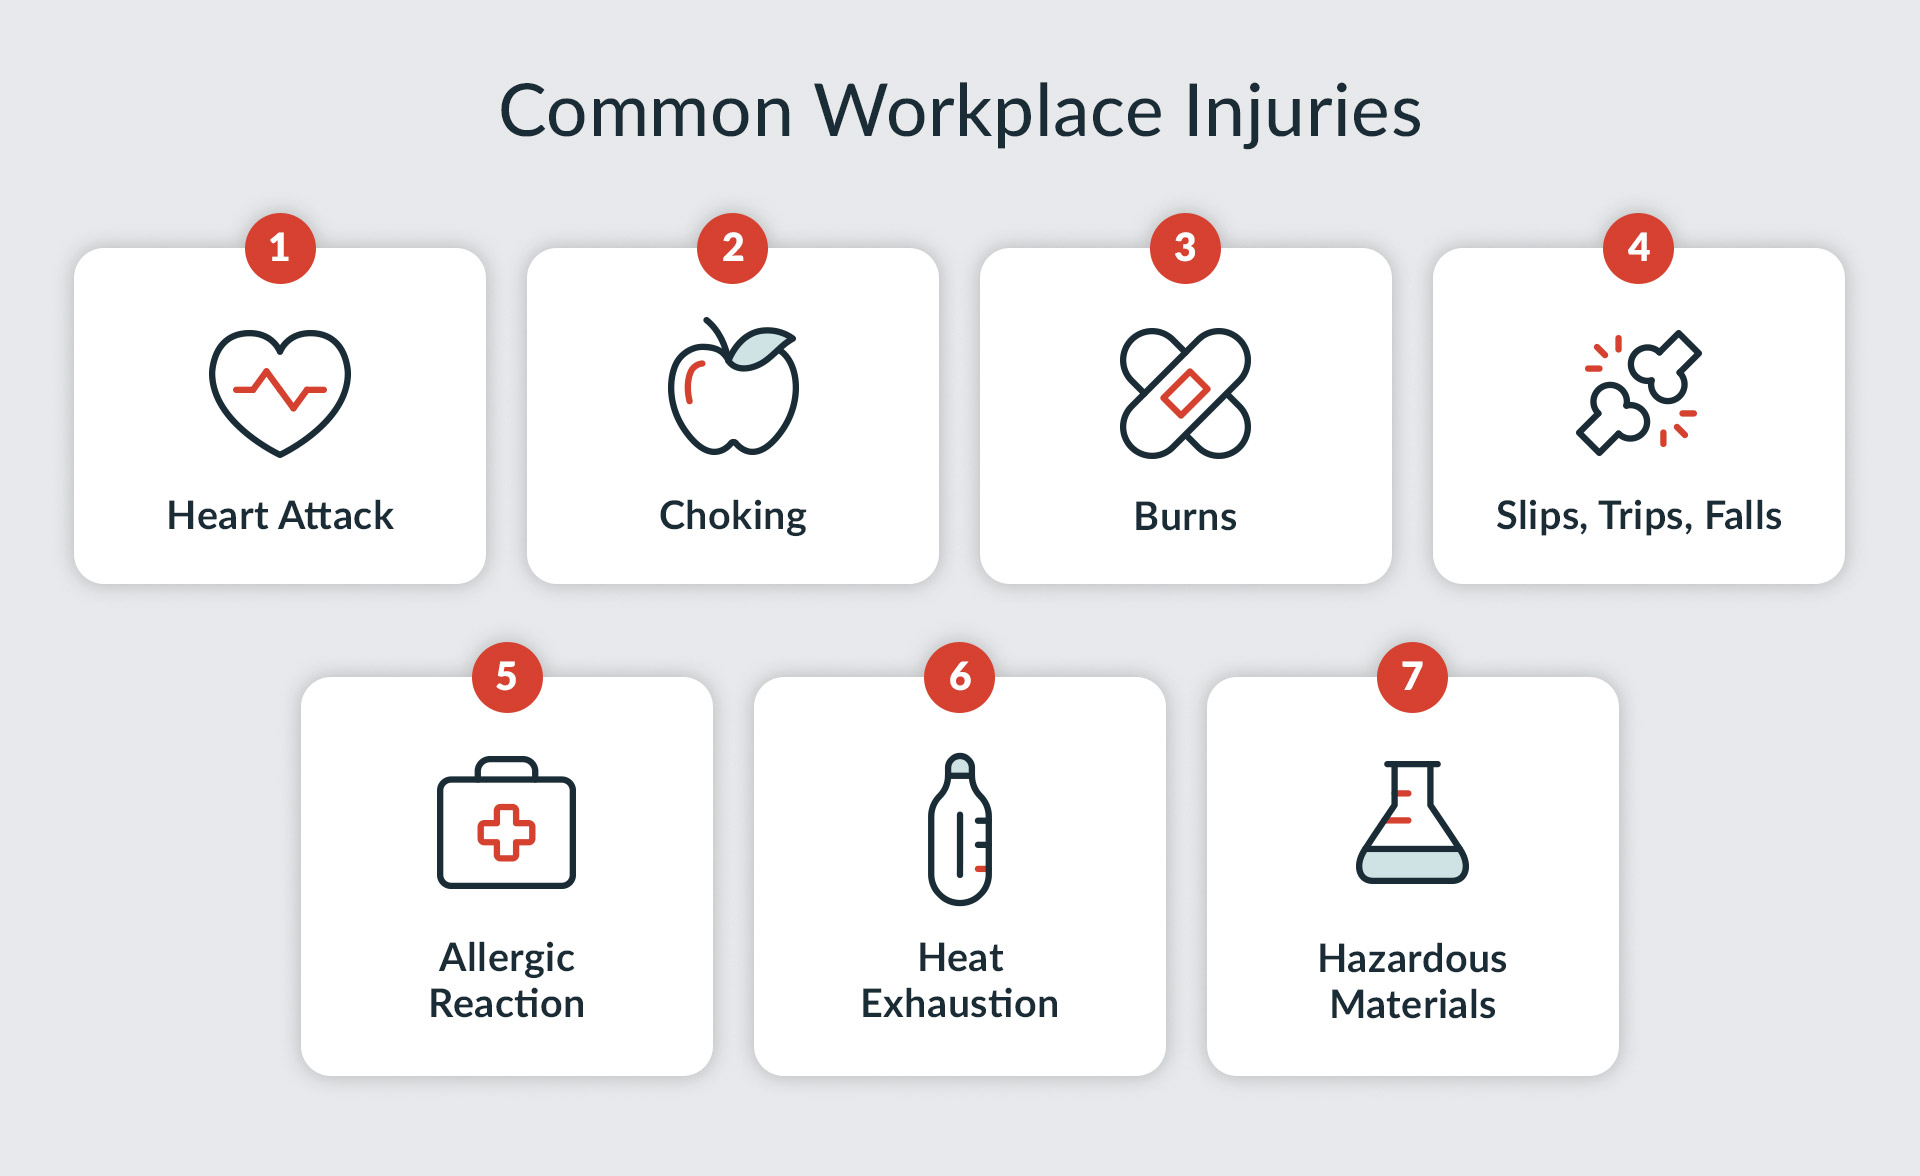 Common workplace injuries: List of 7